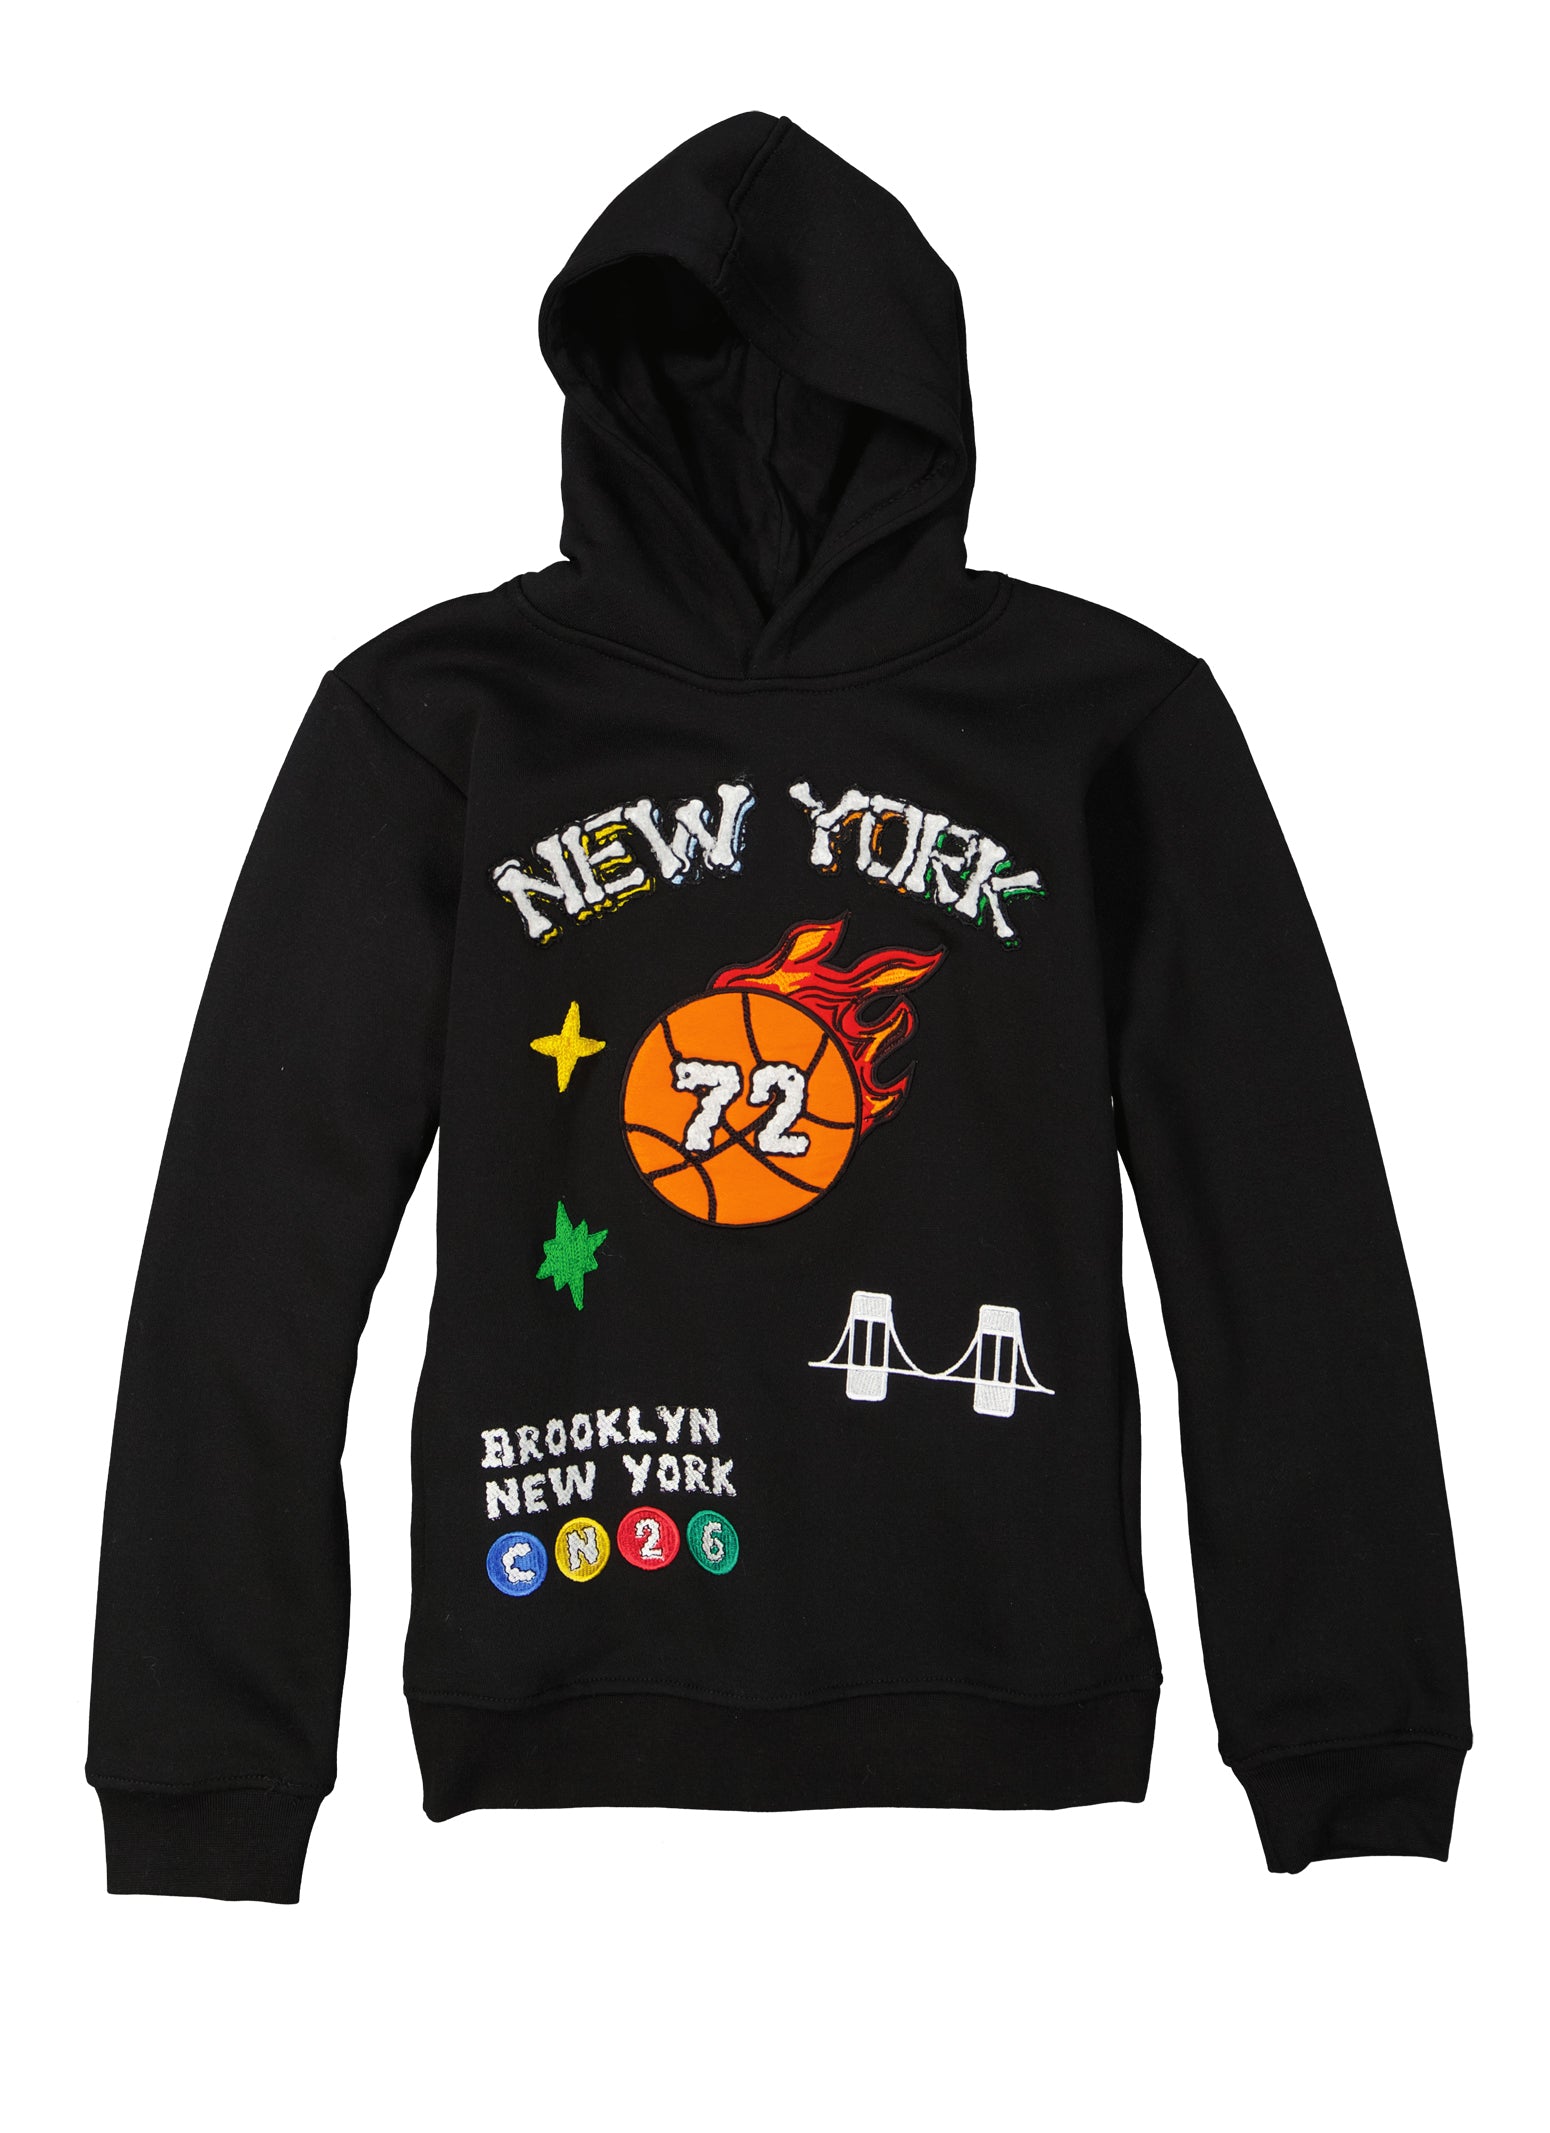 Boys New York Embroidered Patch Graphic Hoodie, Black, Size 10-12